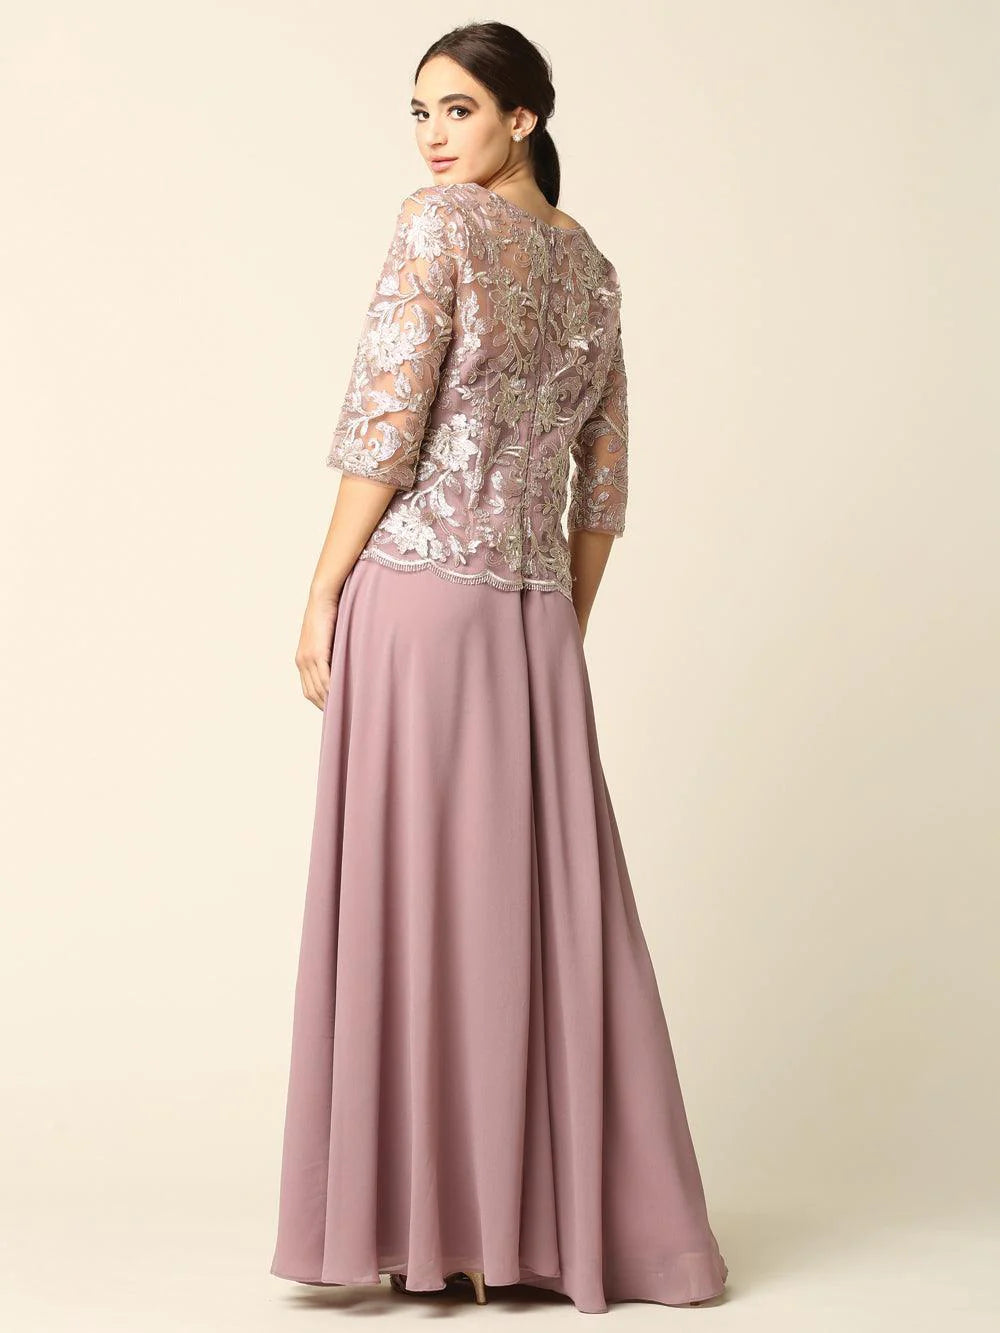 Eva Pink Lace Embellished Evening Gown